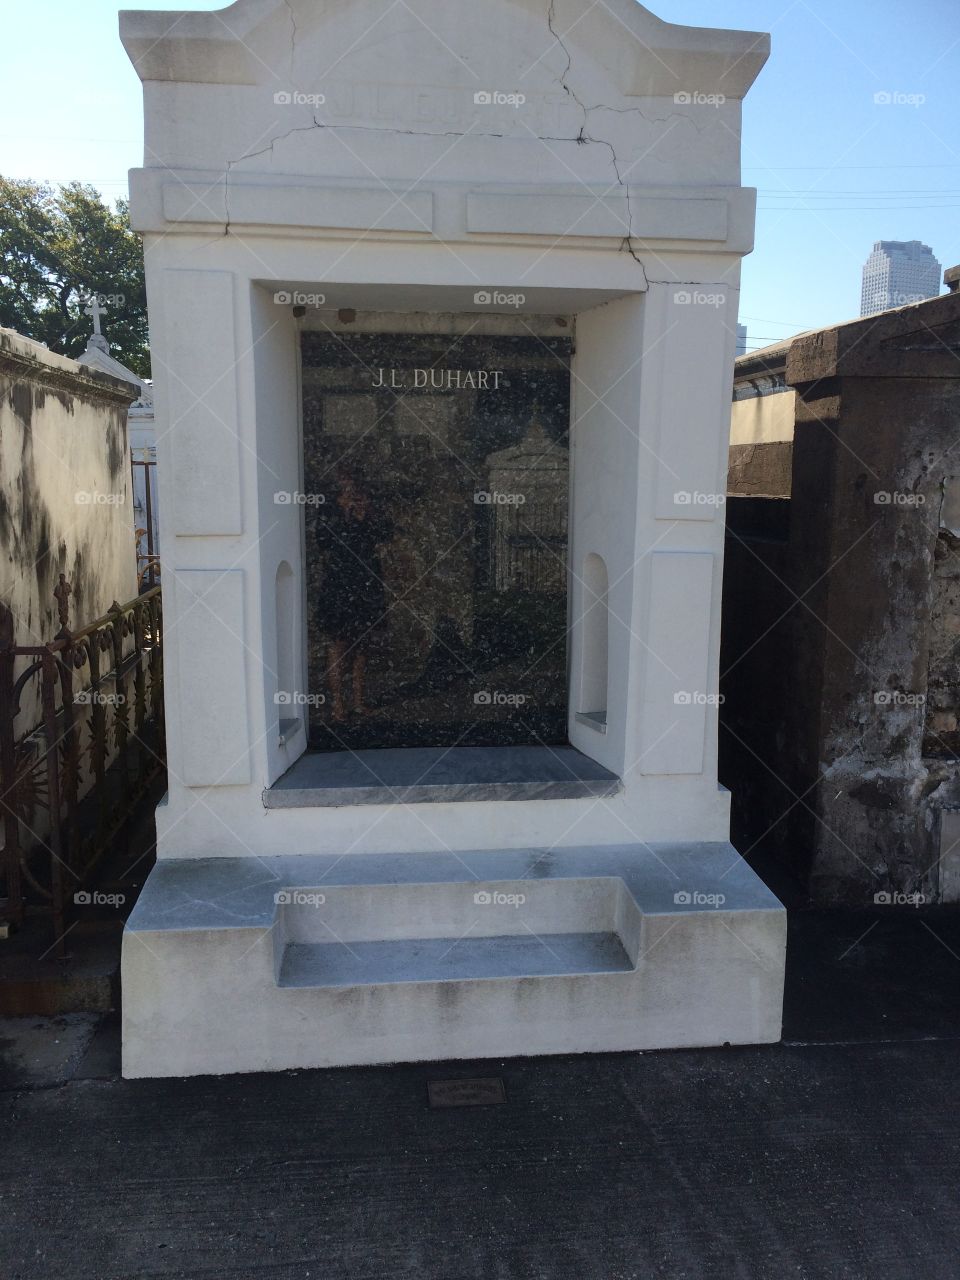 St. Louis cemetery in New Orleans. My reflection shows up on the tomb but I didn't see it when I took the picture.  It was a beautiful building so I didn't want to exclude it.